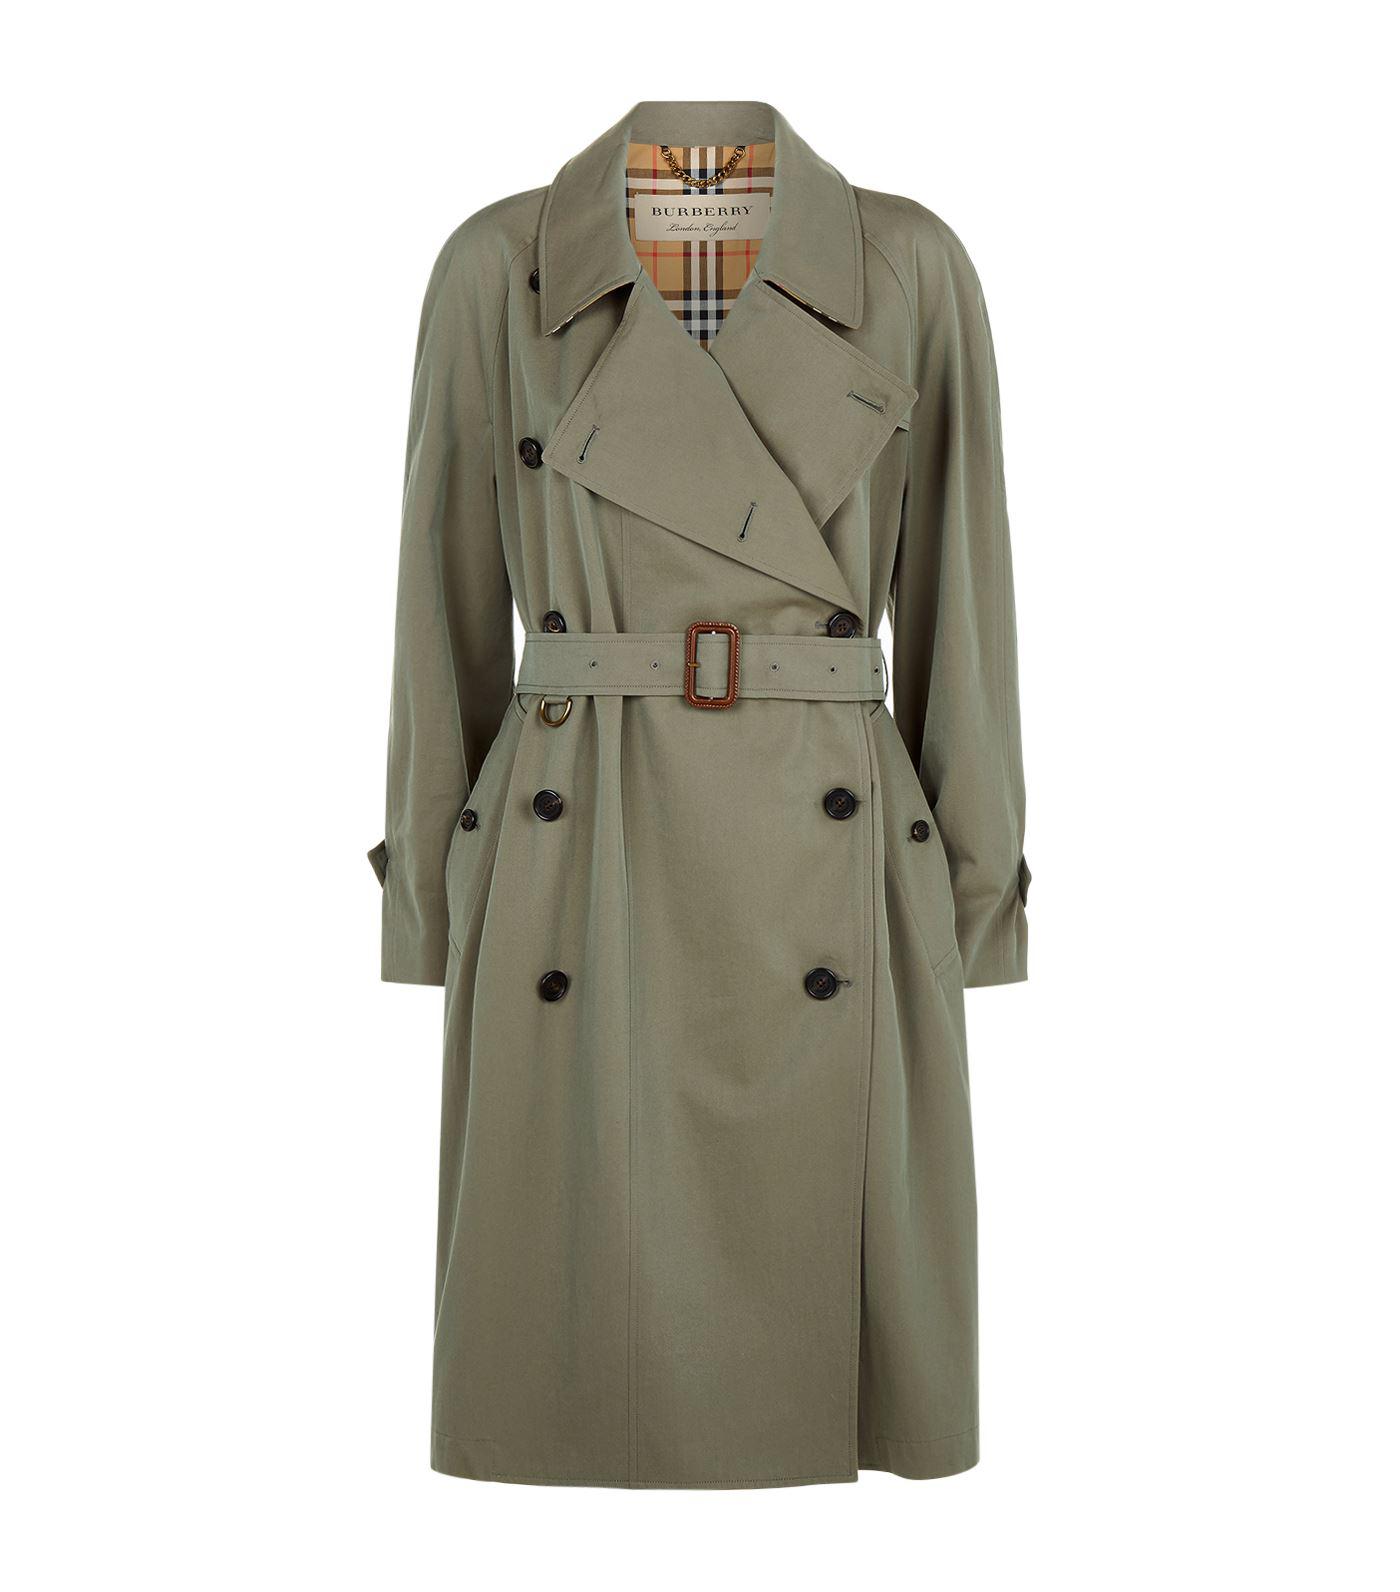 Burberry Charwood Longline Trench Coat in Green - Lyst